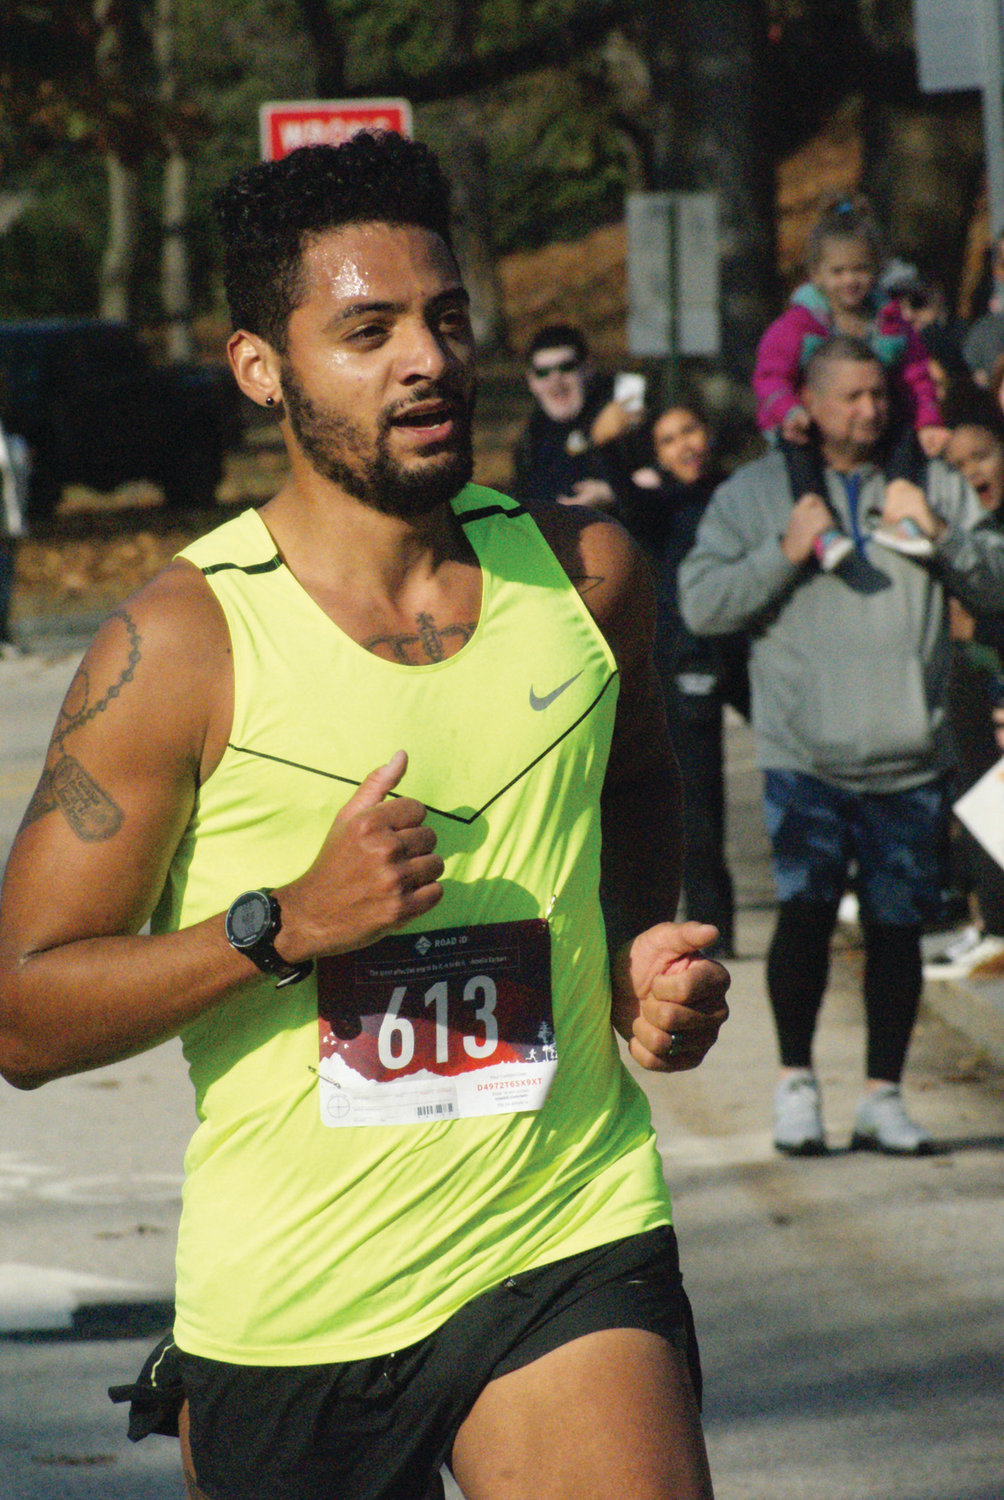 CROSSING THE LINE: Bronson Venable of Warwick won the Park View Veterans Day 5K with a time of 15 minutes, 35 seconds. It is the third year in a row he has taken top honors.